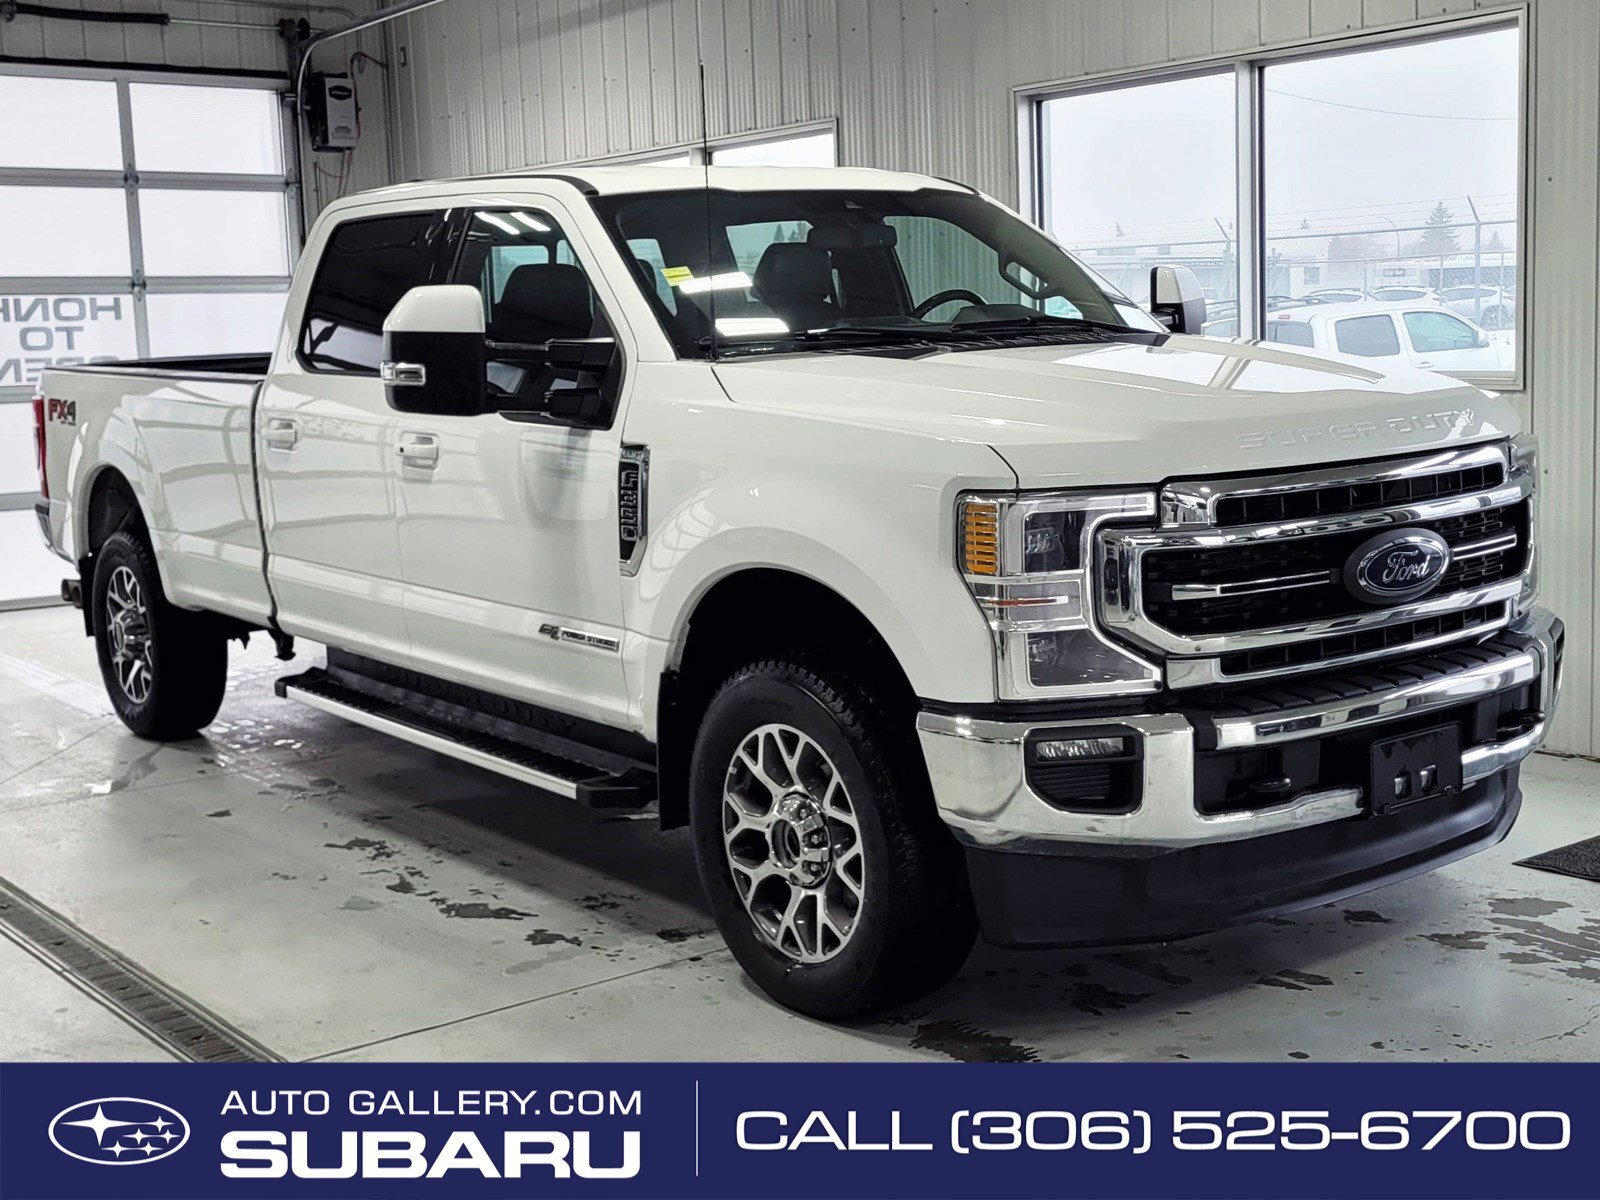 2022 Ford F-350 LARIAT 4X4 | TURBODIESEL | HEAT/COOL LEATHER